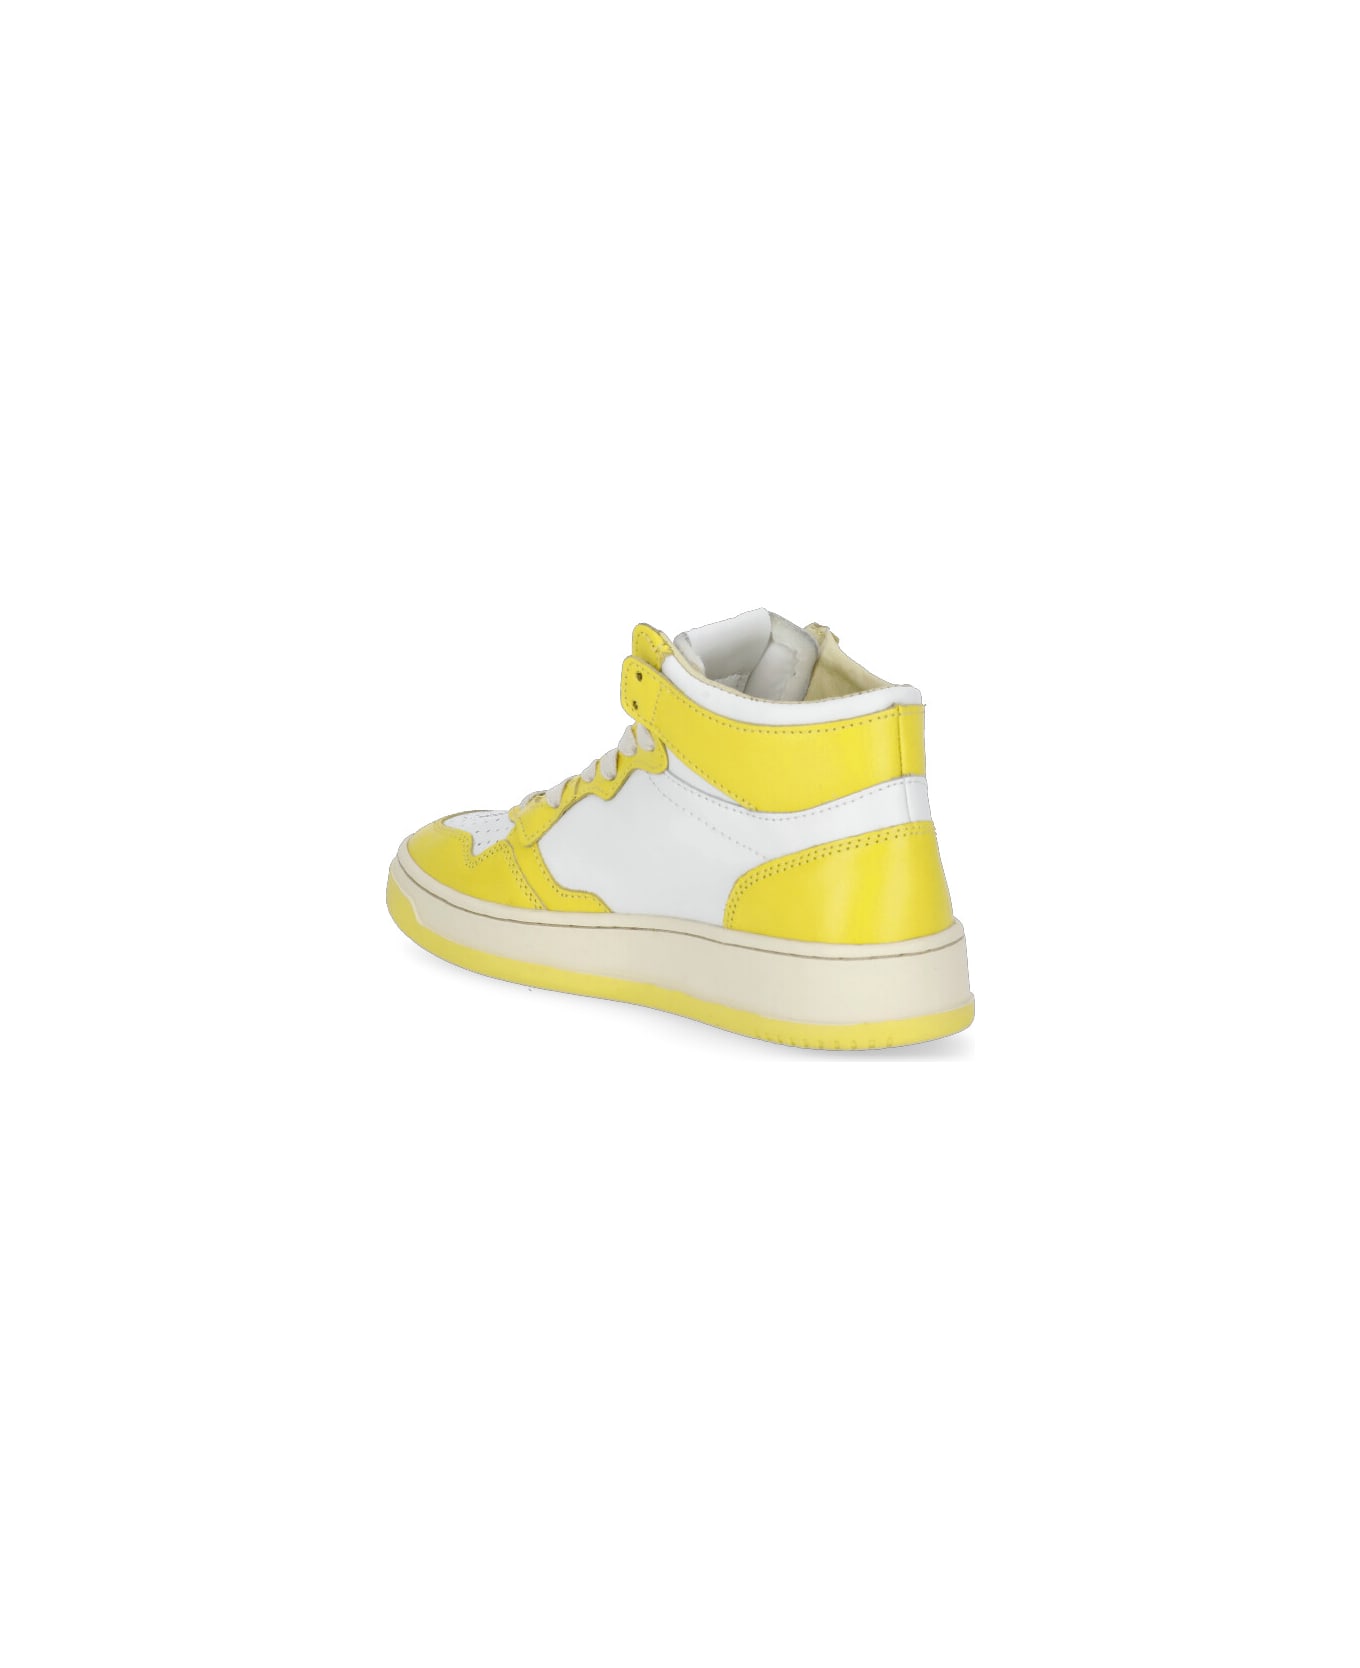 Autry Sneakers - Leat Yellow スニーカー